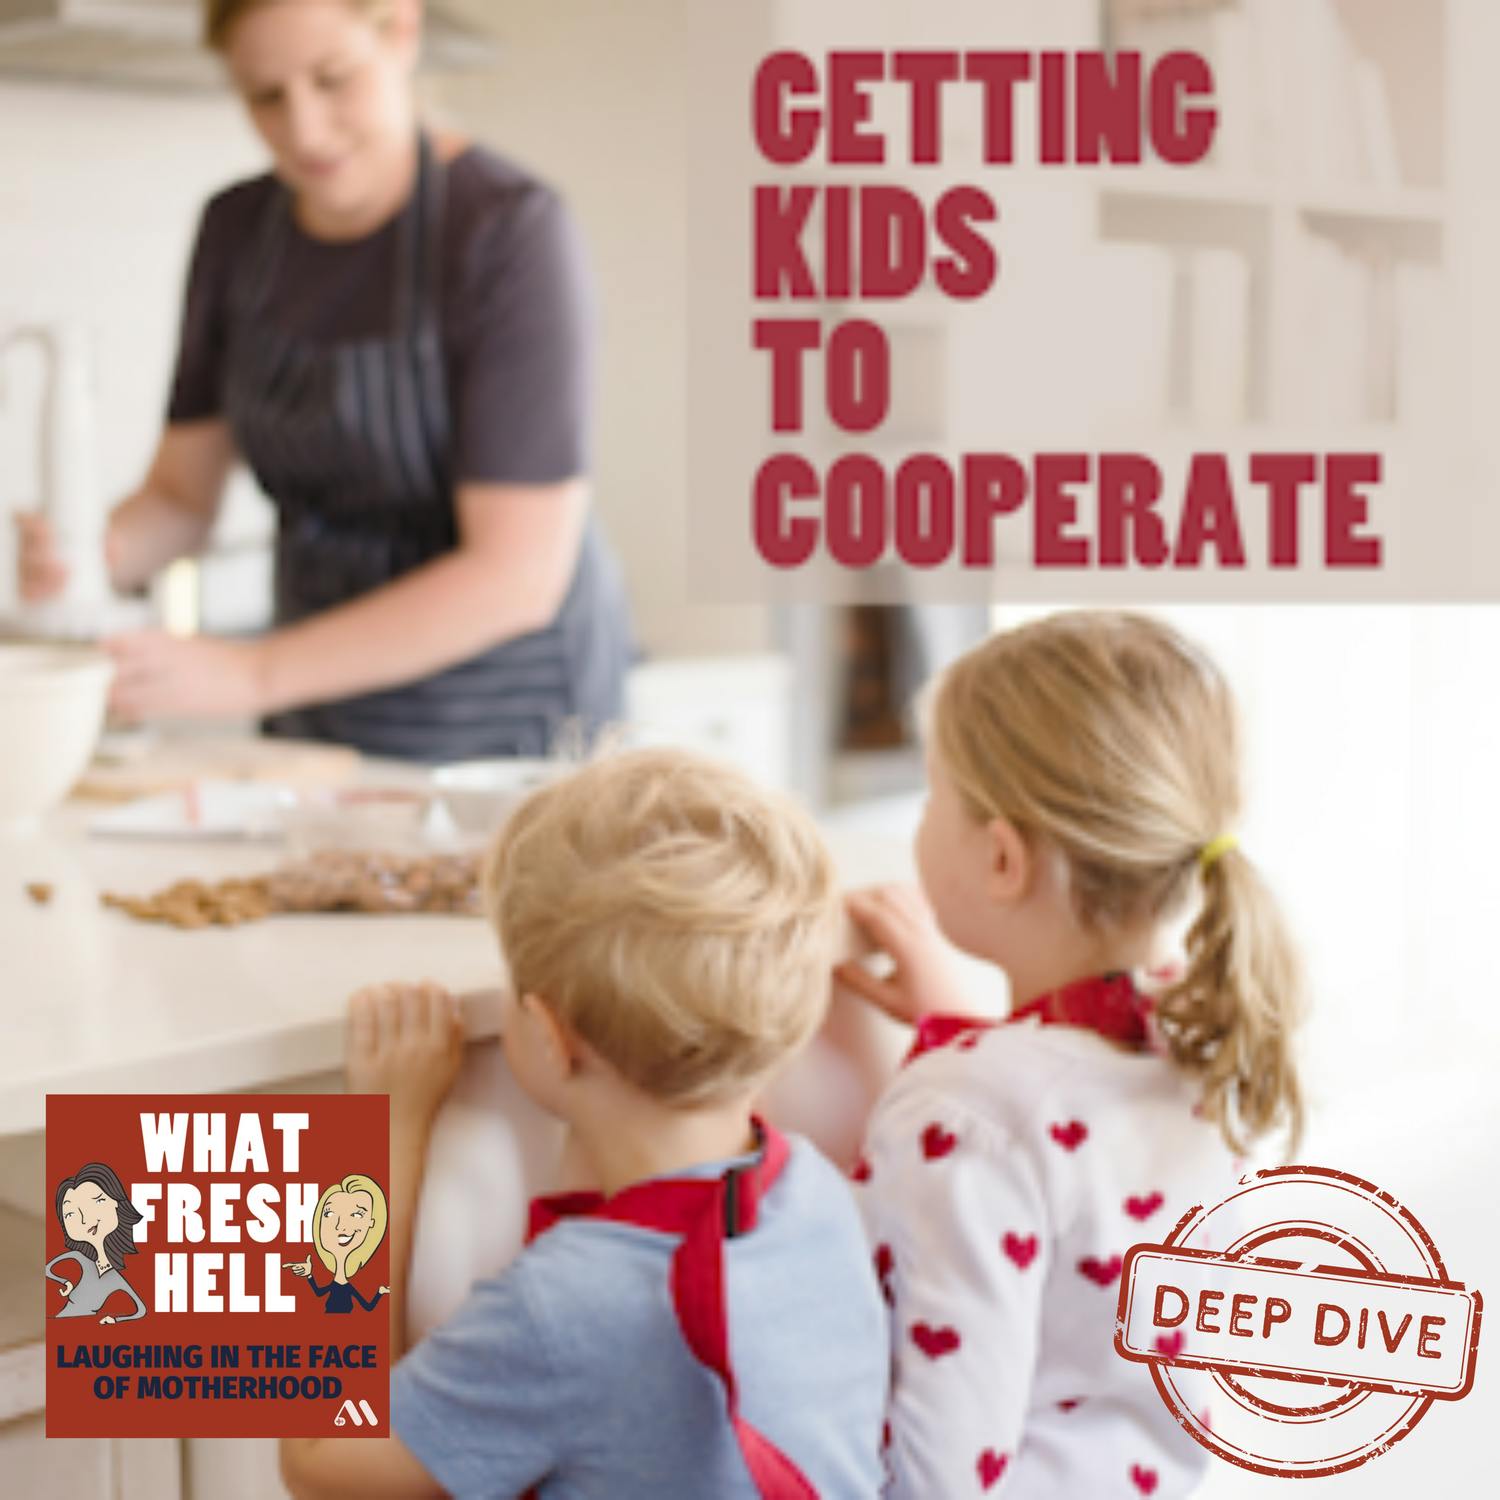 DEEP DIVE: Getting Kids to Cooperate